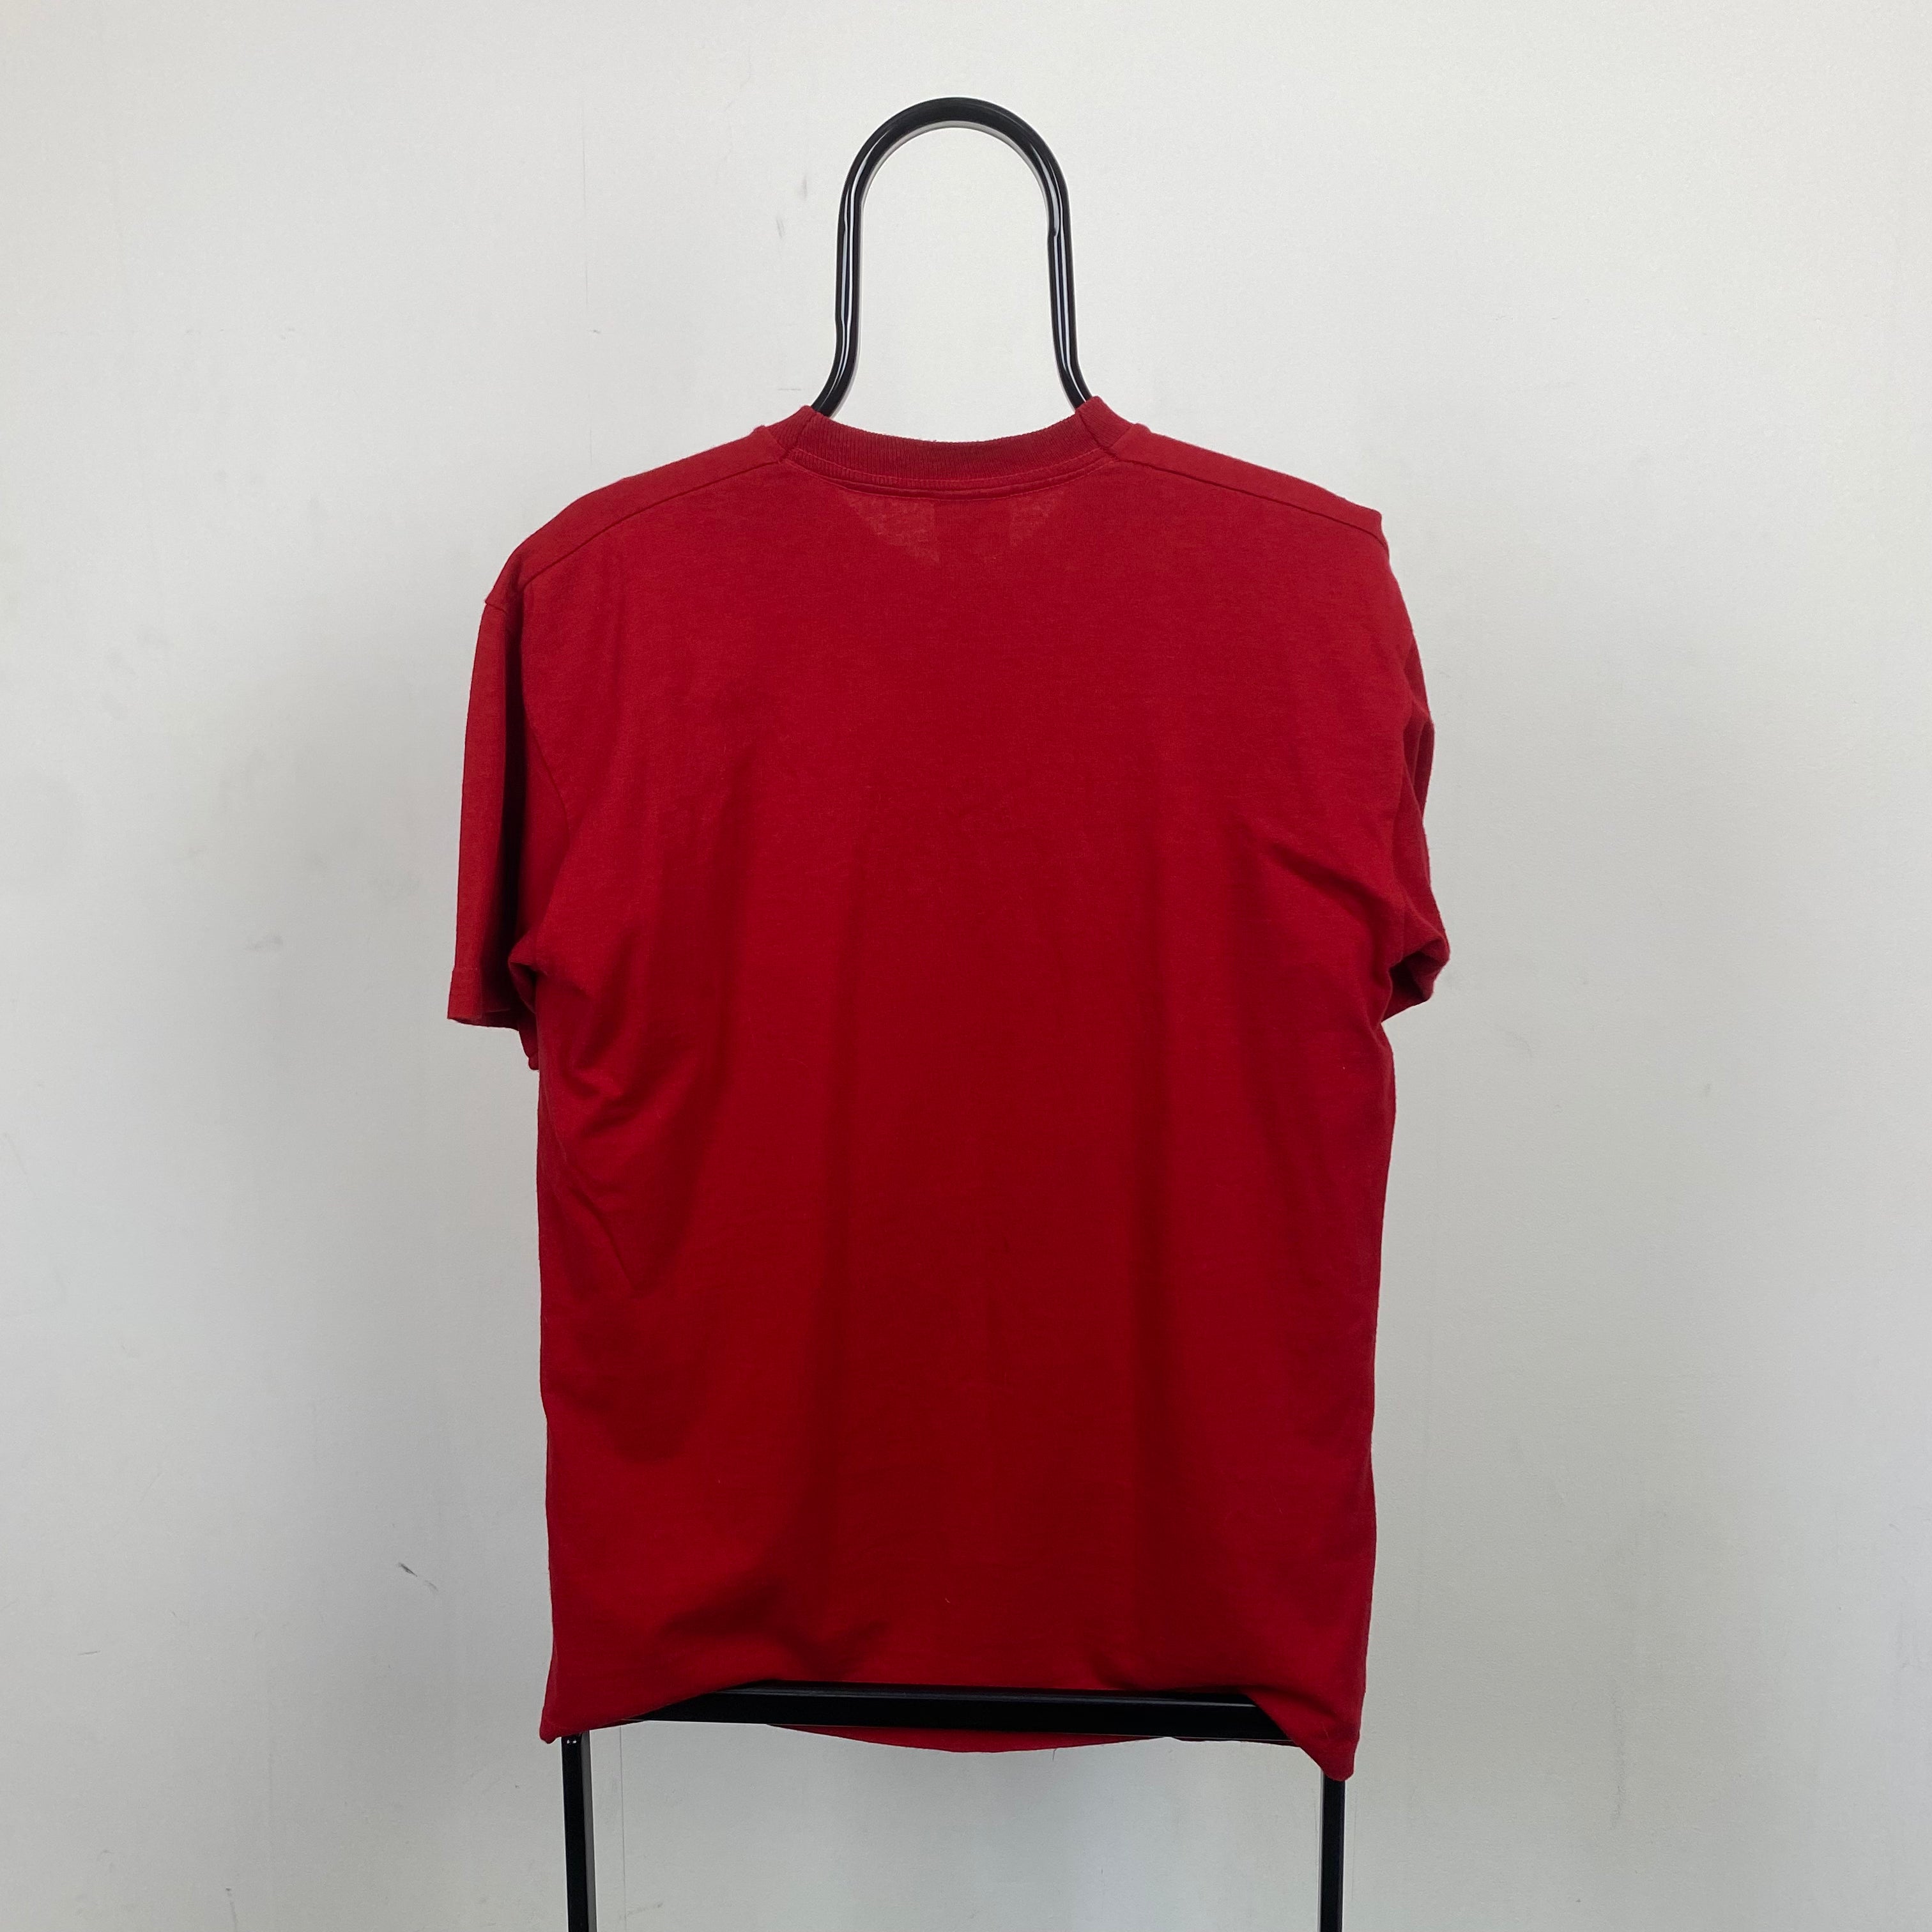 90s Nike T-Shirt Red Small